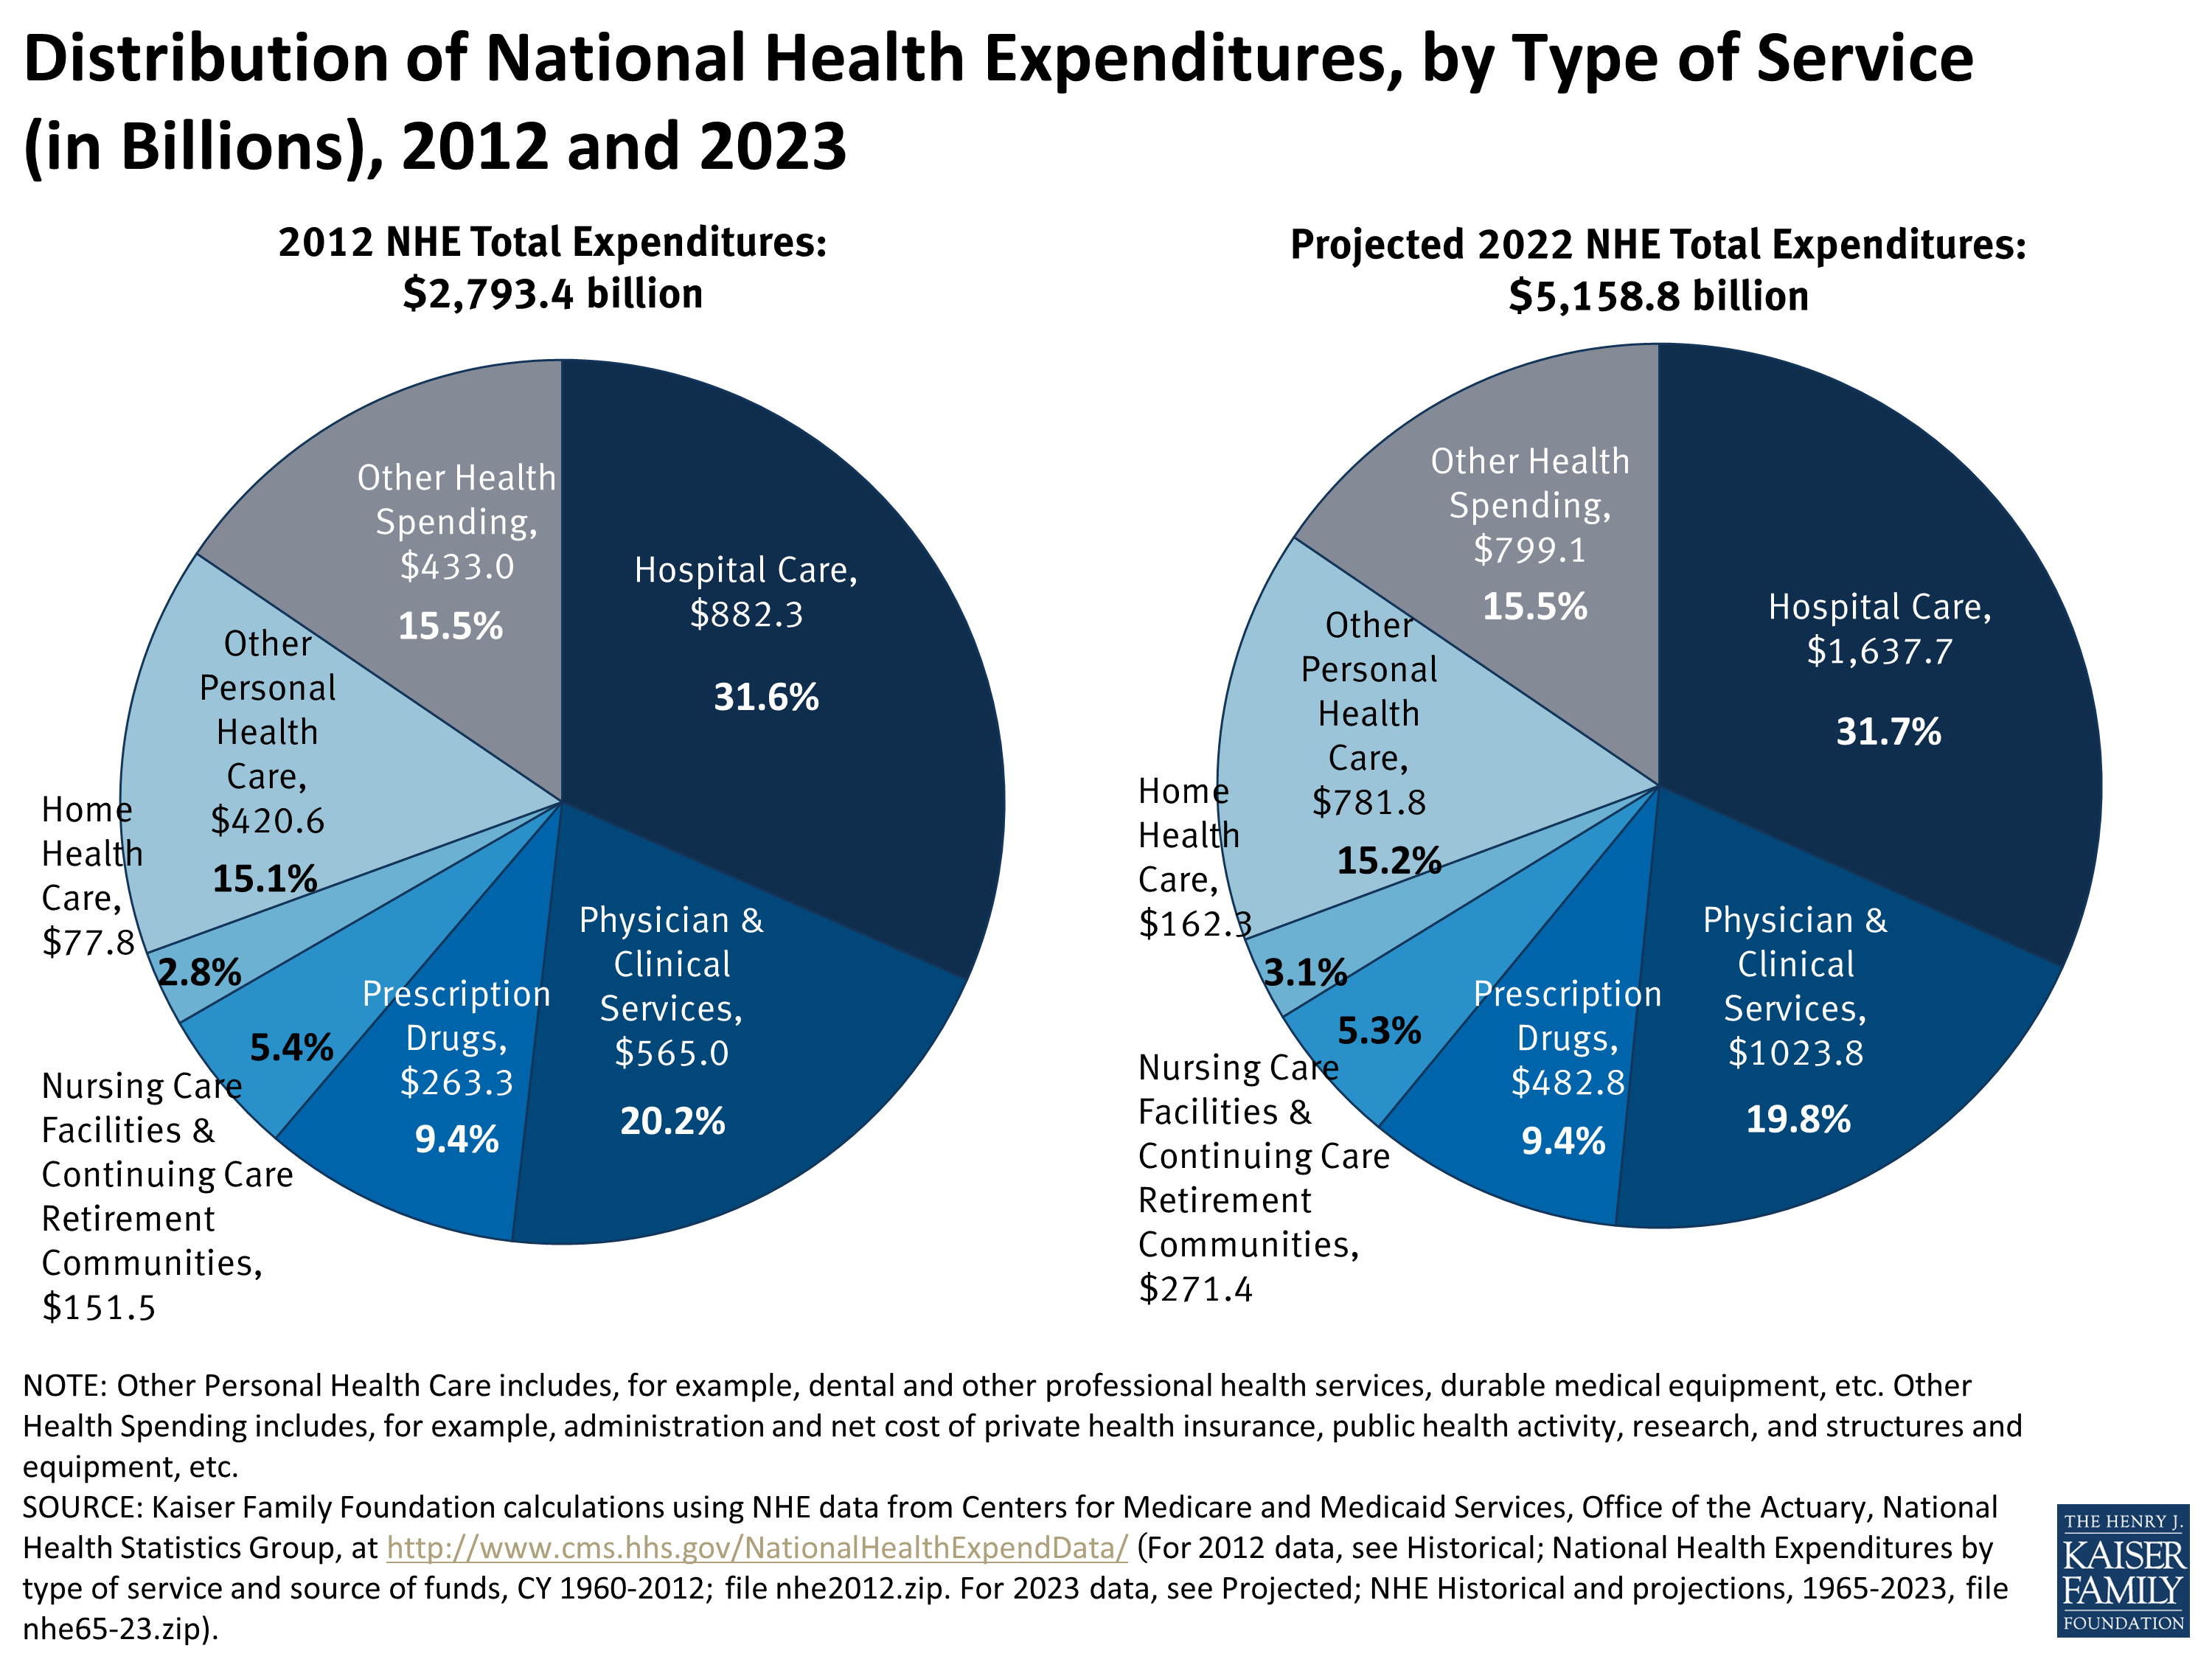 Distribution Of National Health Expenditures By Type Of Service In Billions 2012 And 2023 Healthcosts 